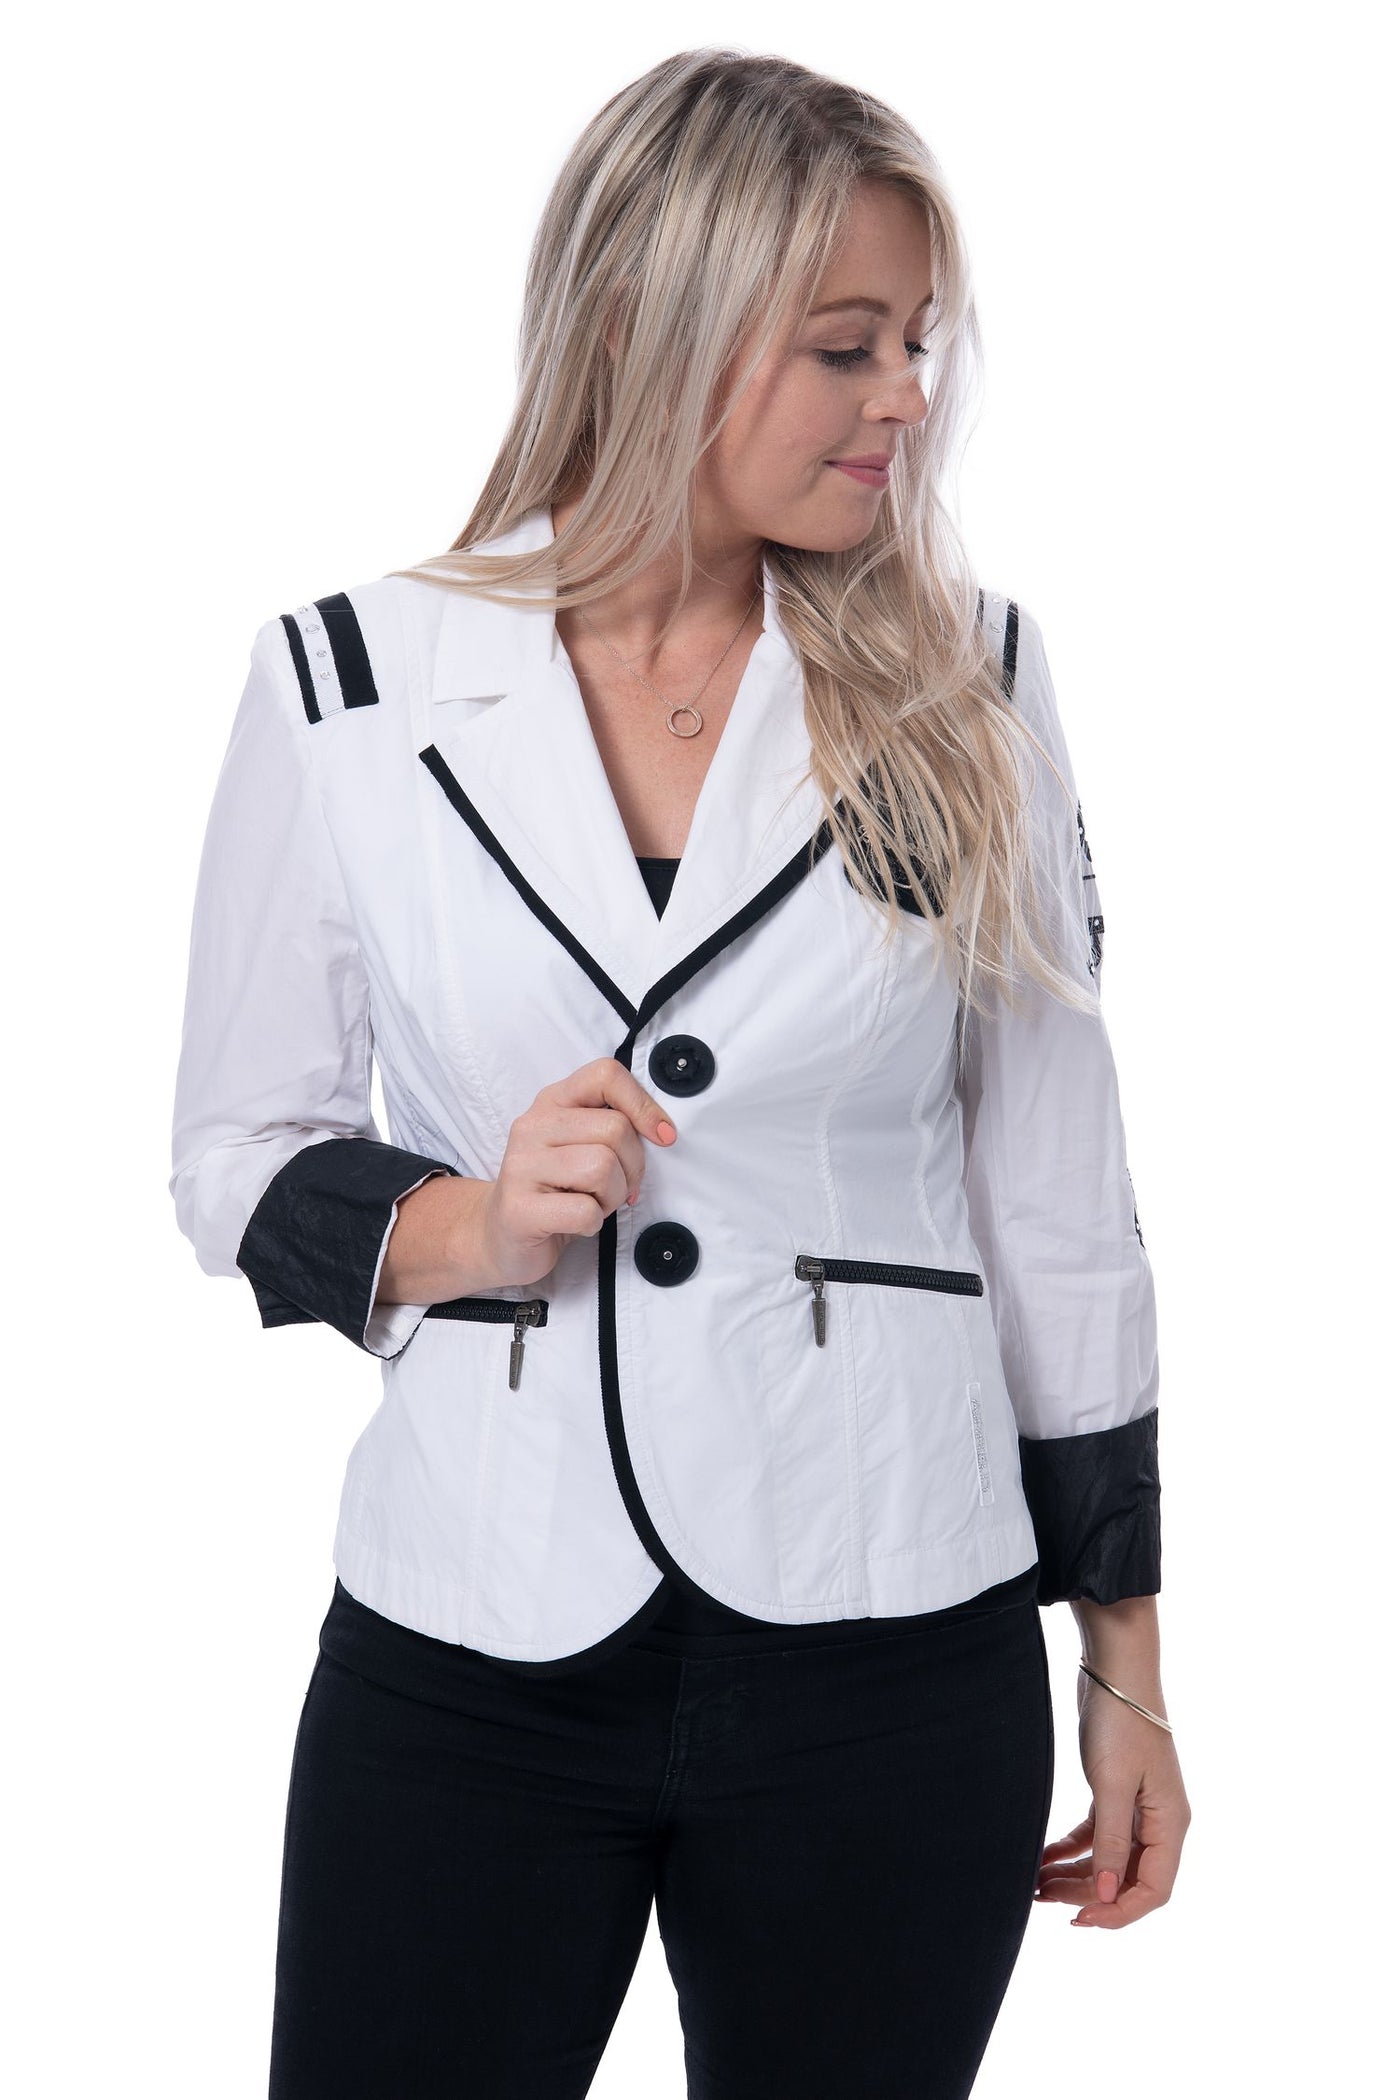 Airfield authentic signature white jacket with black trim